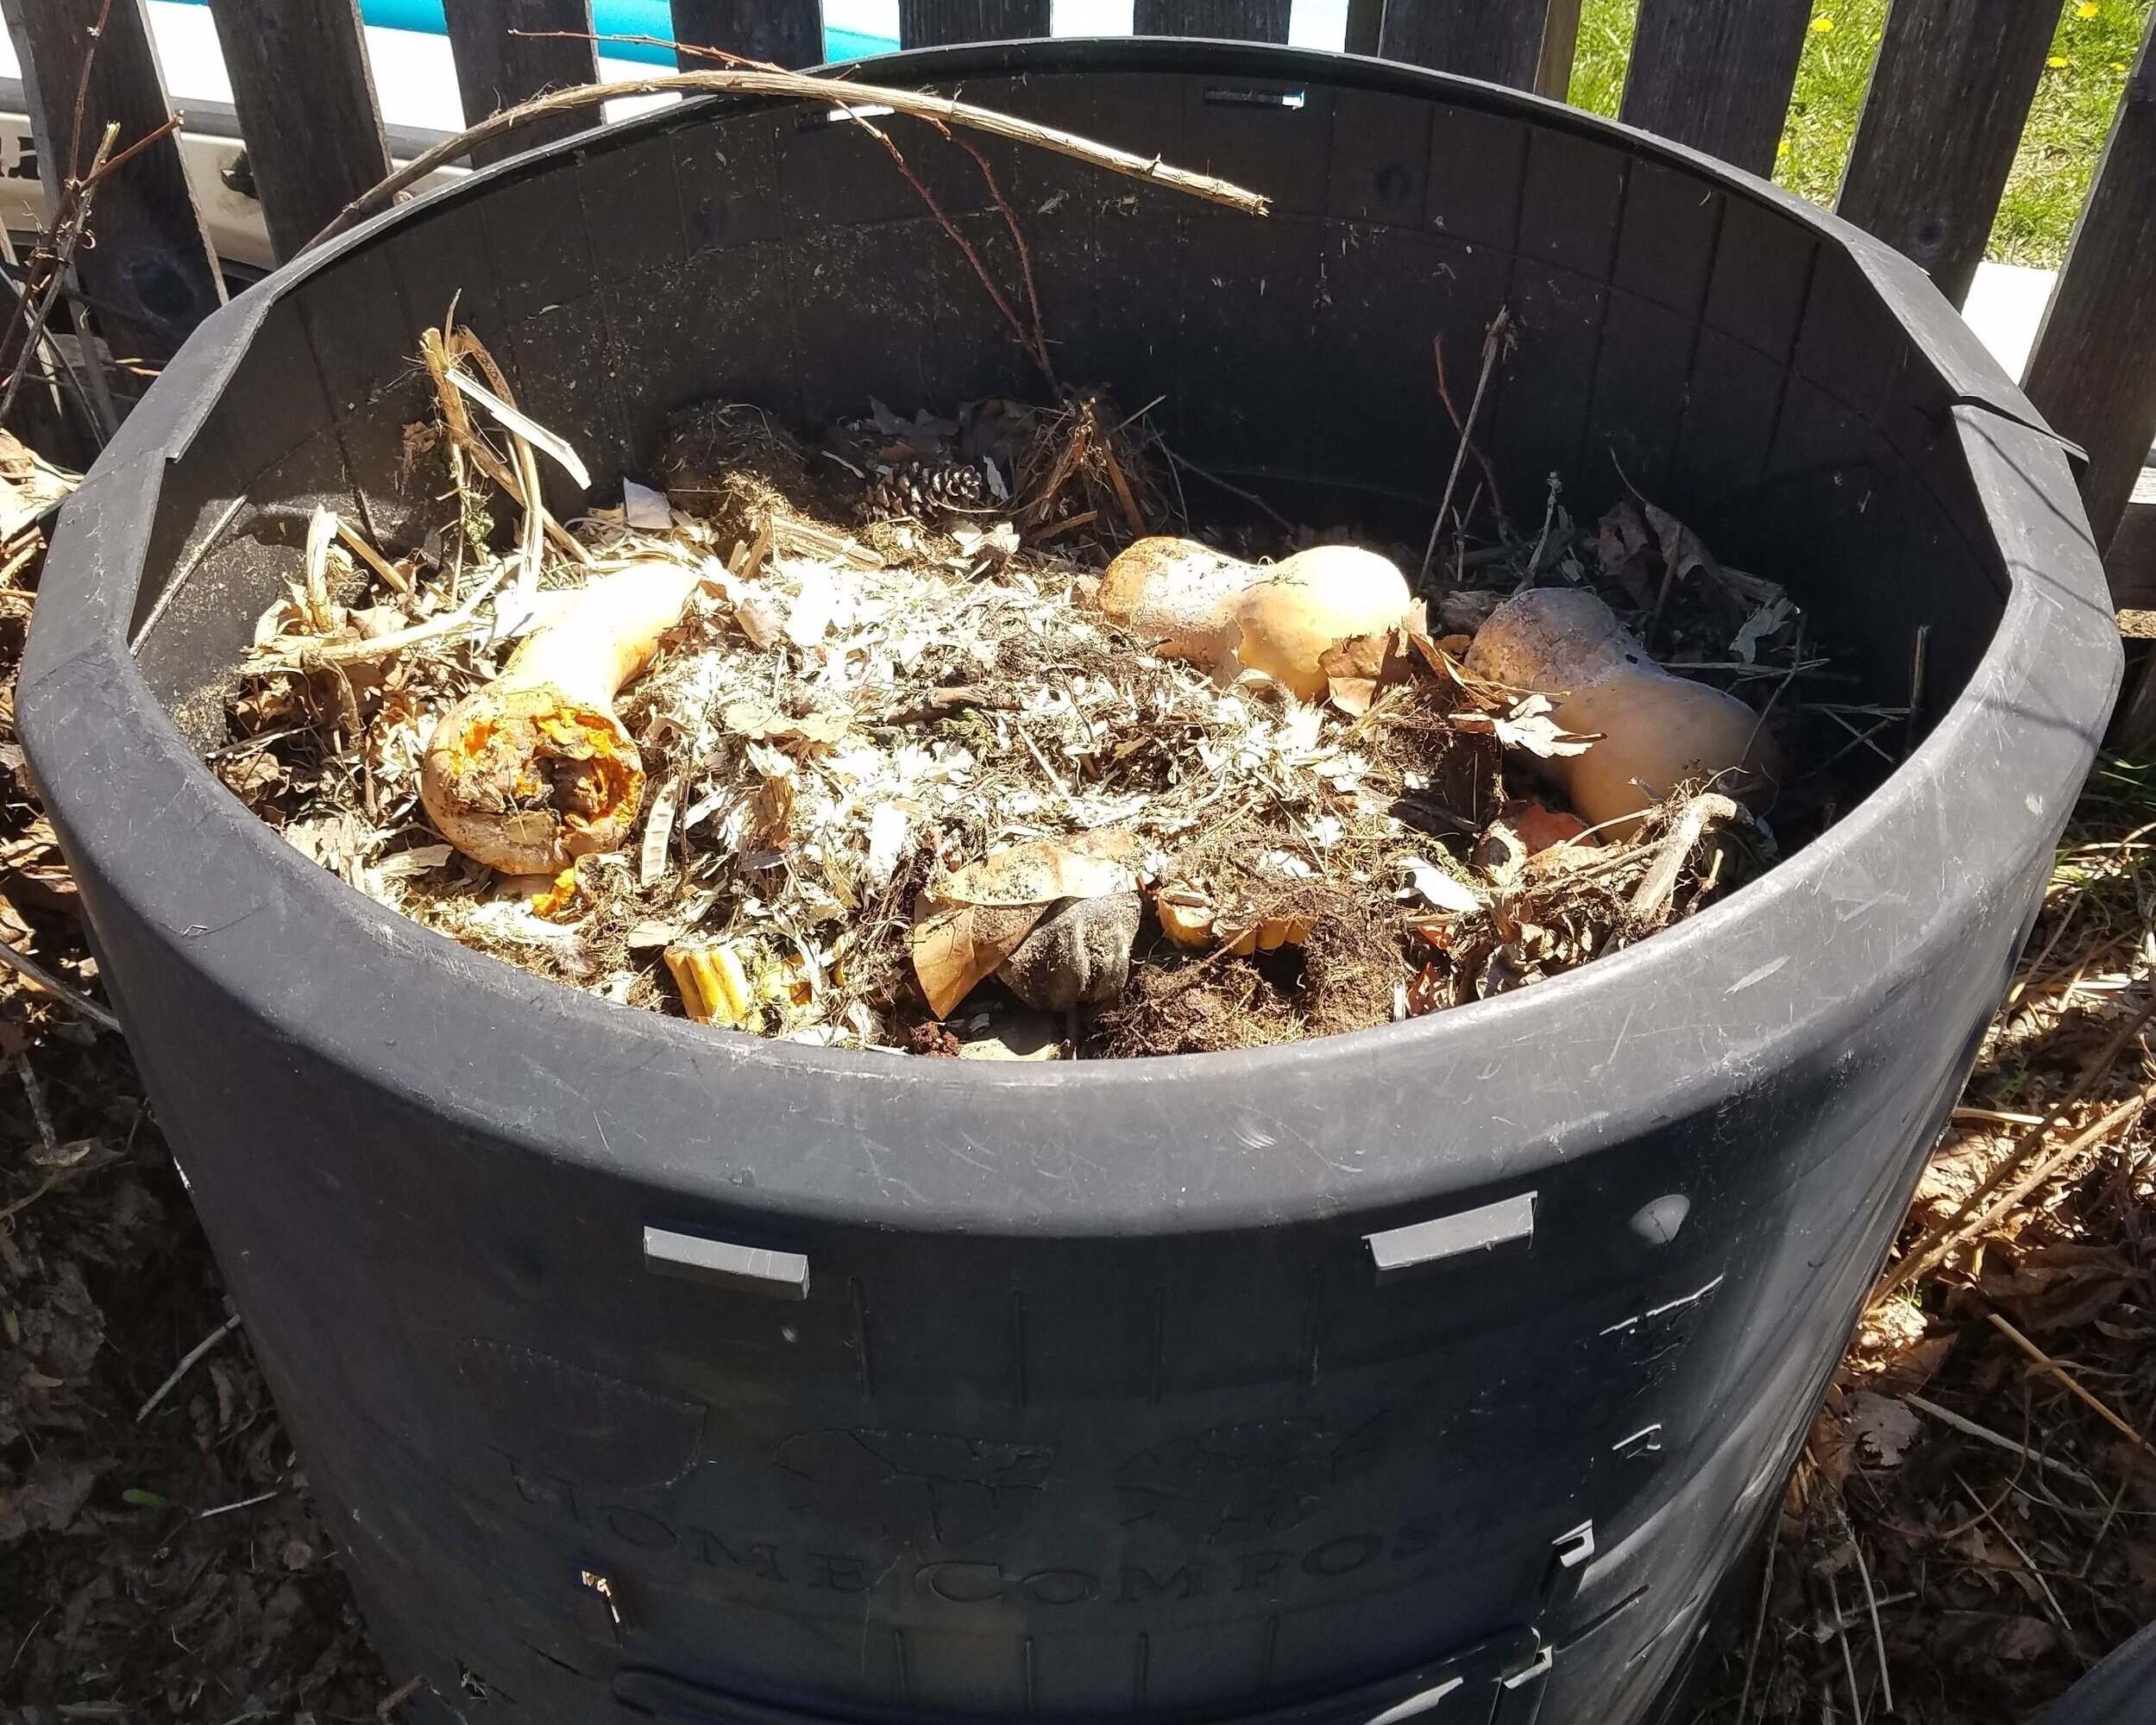 Composting — Marathon County Solid Waste Department